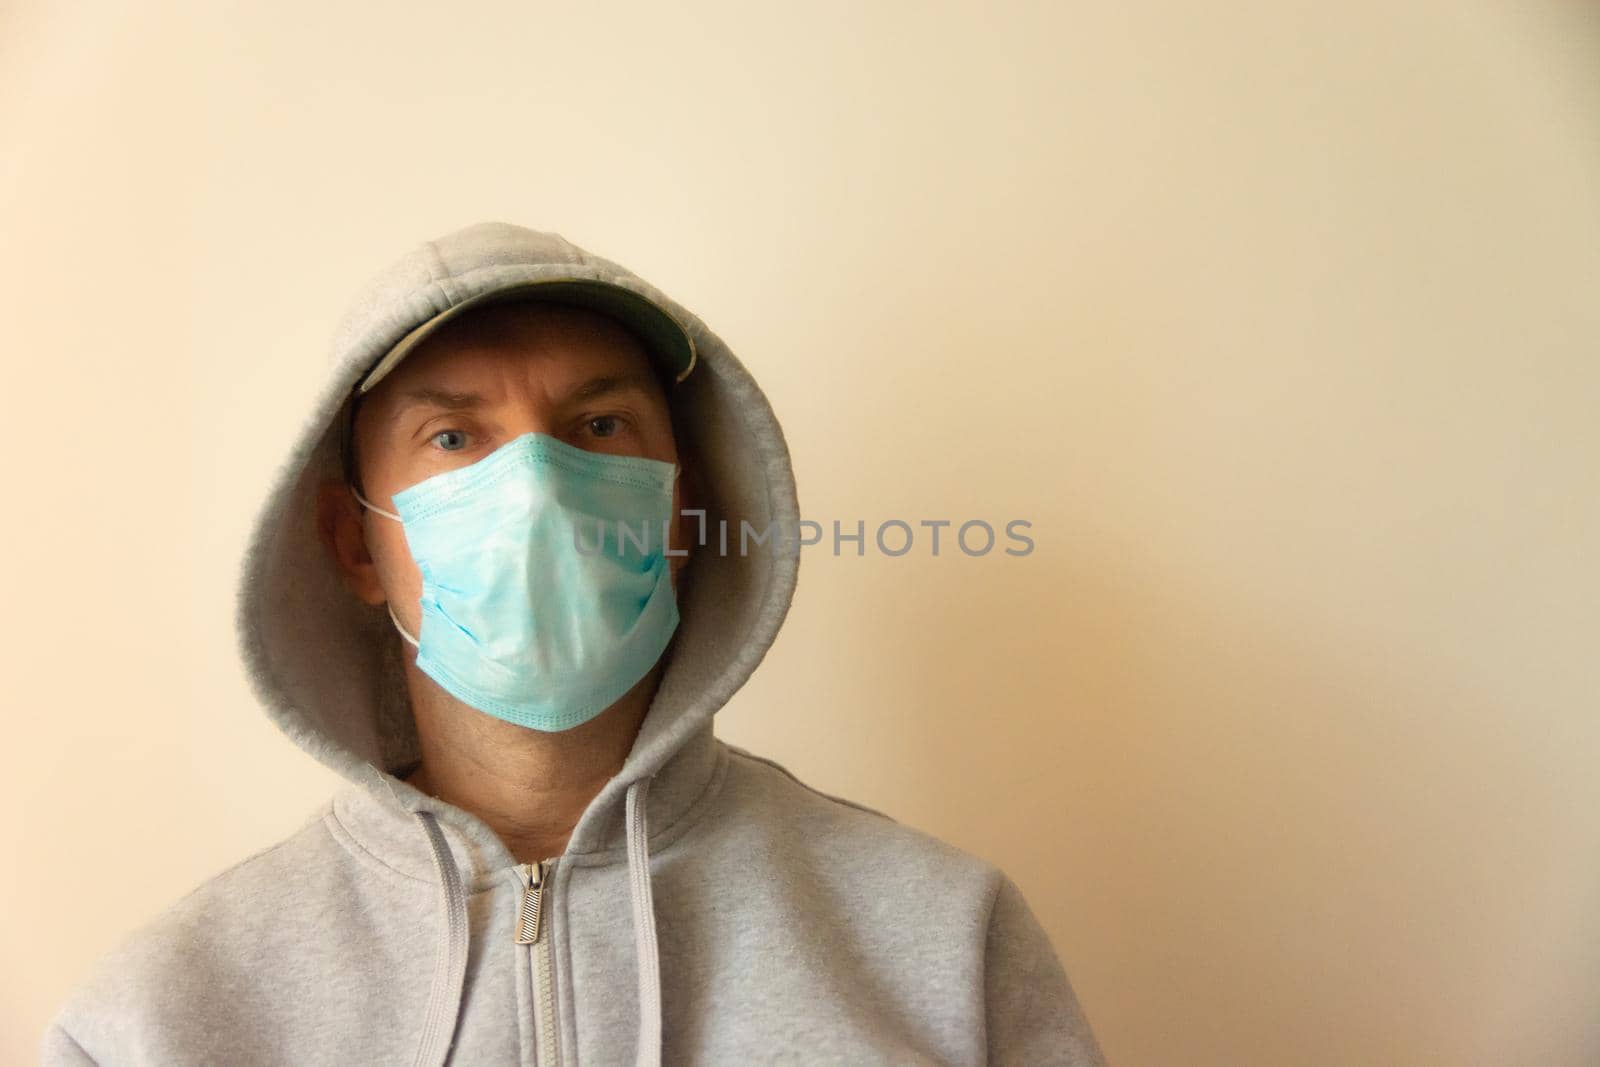 A man with a blue mask on his face and a hood on his head